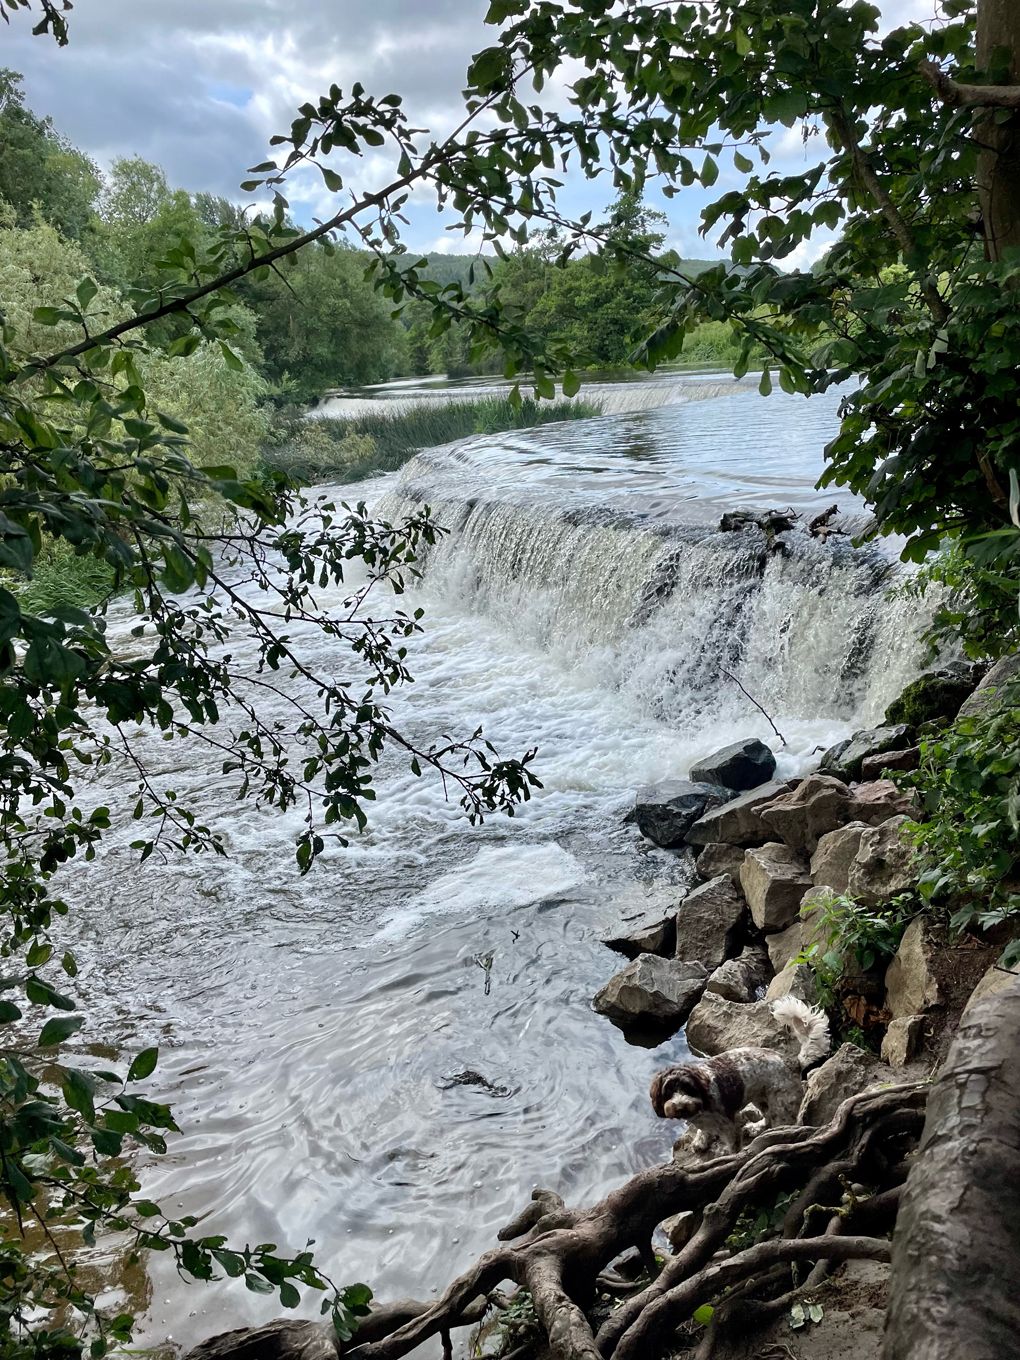 Water cascading down a weir surrounded by trees with a small dog in the foreground